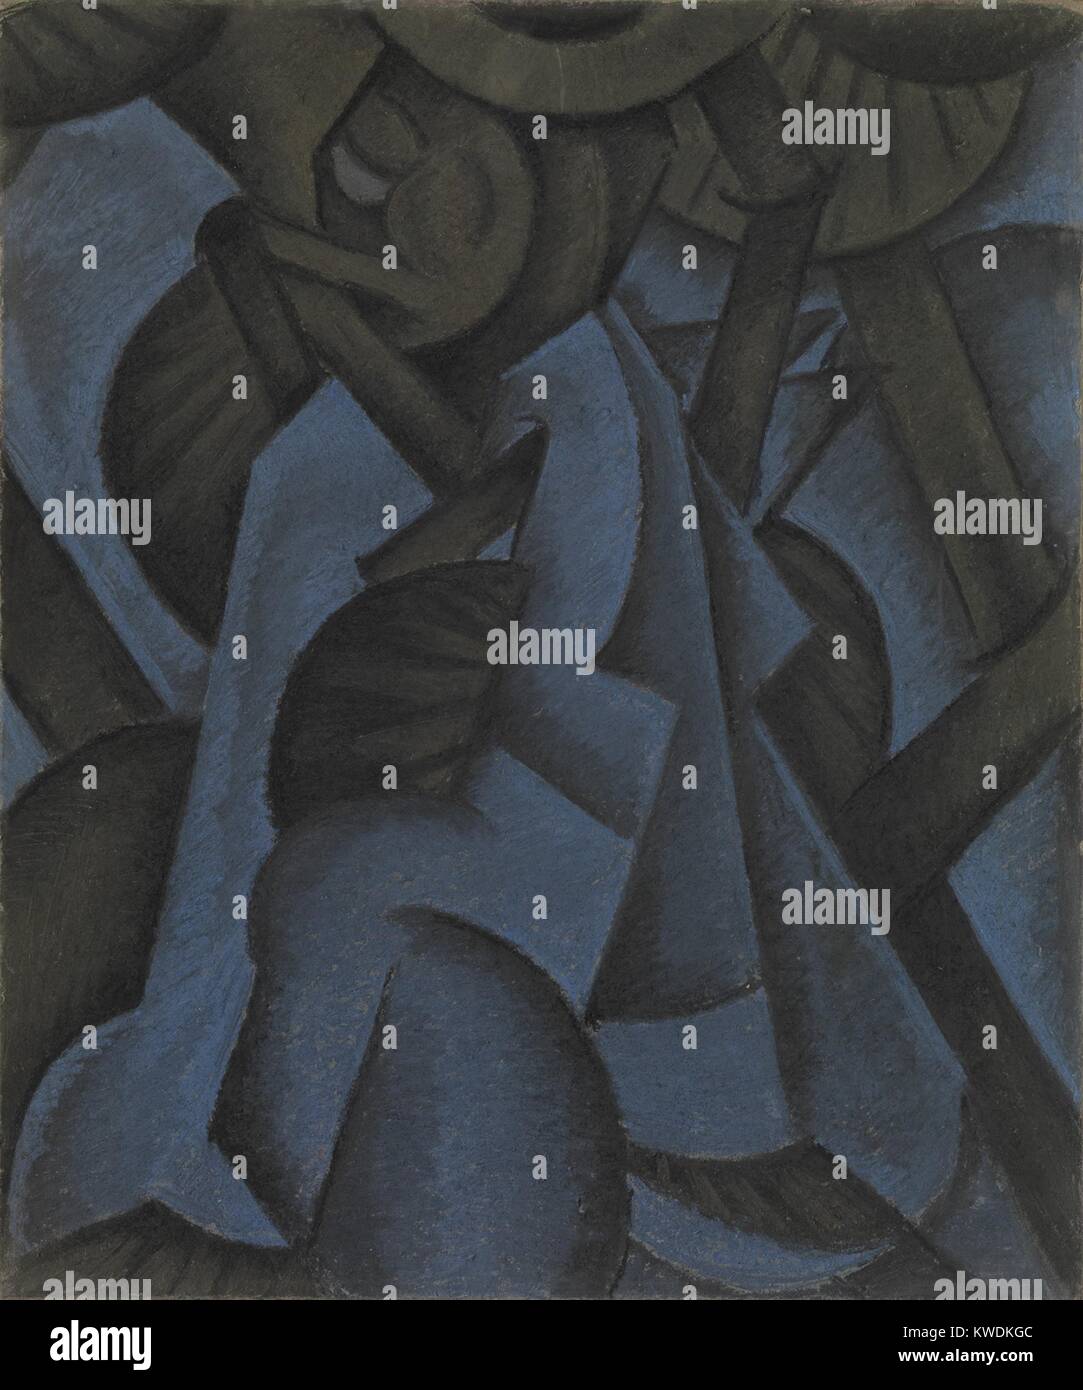 PAGAN PHILOSOPHY, by Arthur Dove, 1913, American drawing, pastel on paperboard. This work shows the influence of European Cubism and Expressionism. Abstract forms can be read as the interaction of a blue human, in lower central triangle, and brown mechanical forms (BSLOC 2017 7 77) Stock Photo